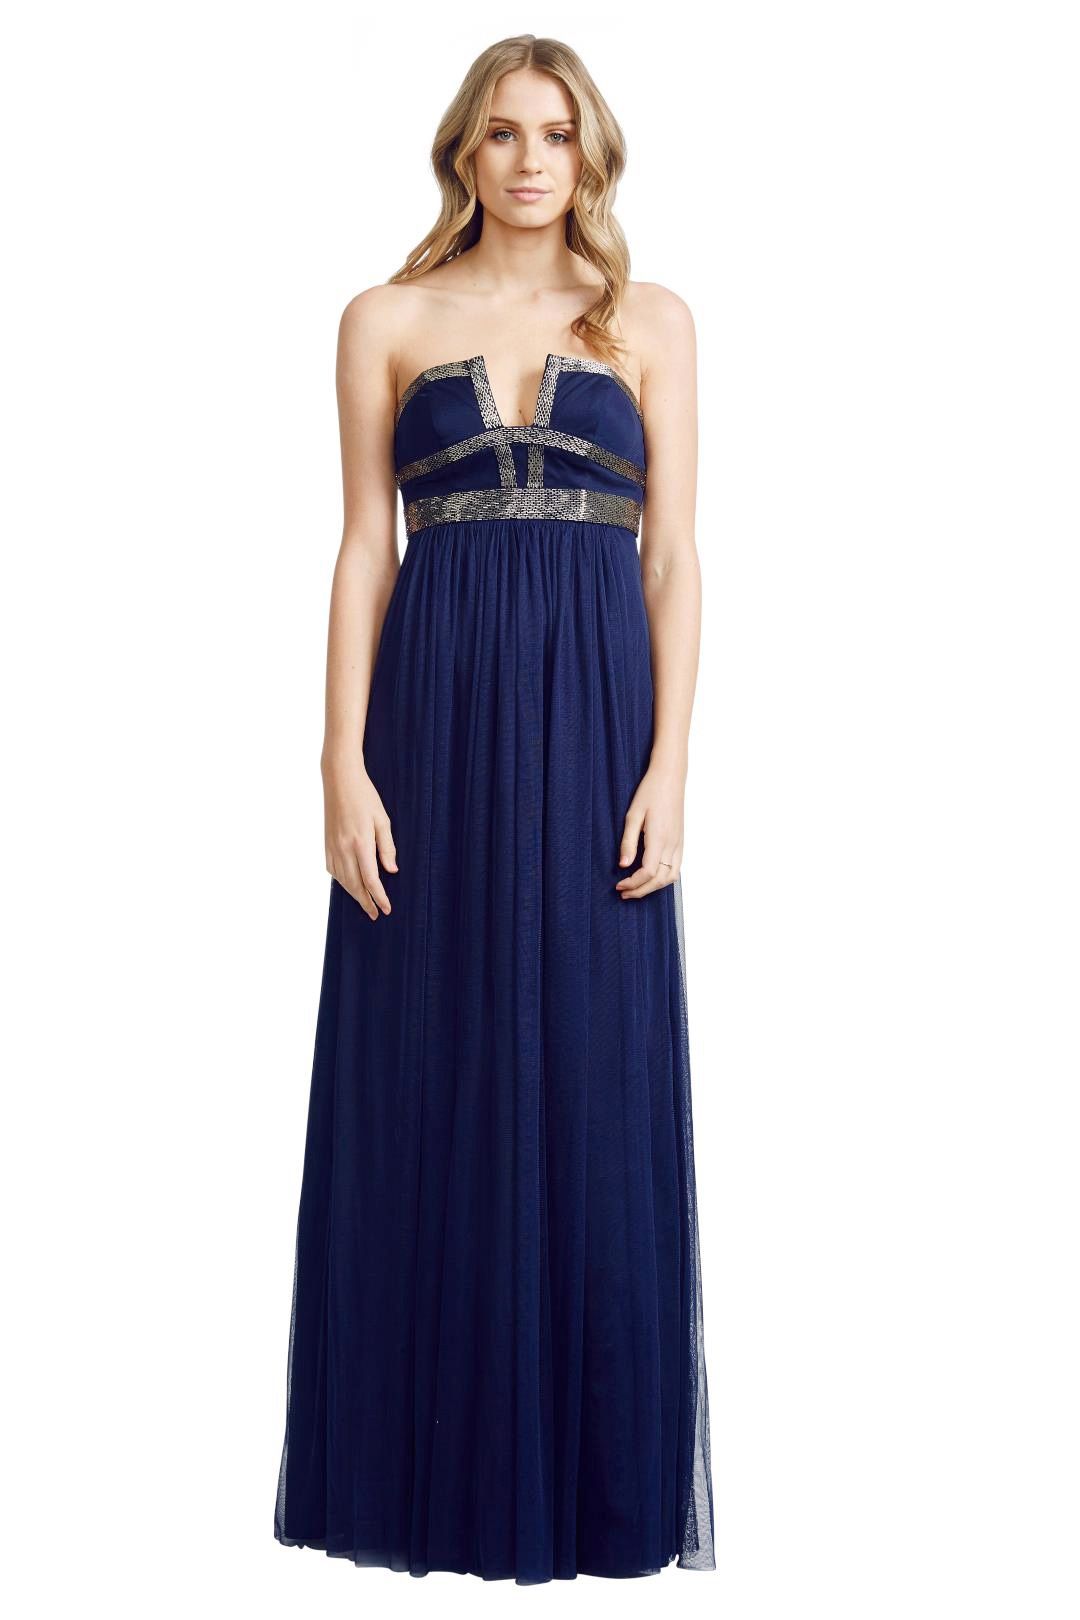 George - Hailey Gown - Blue - Front